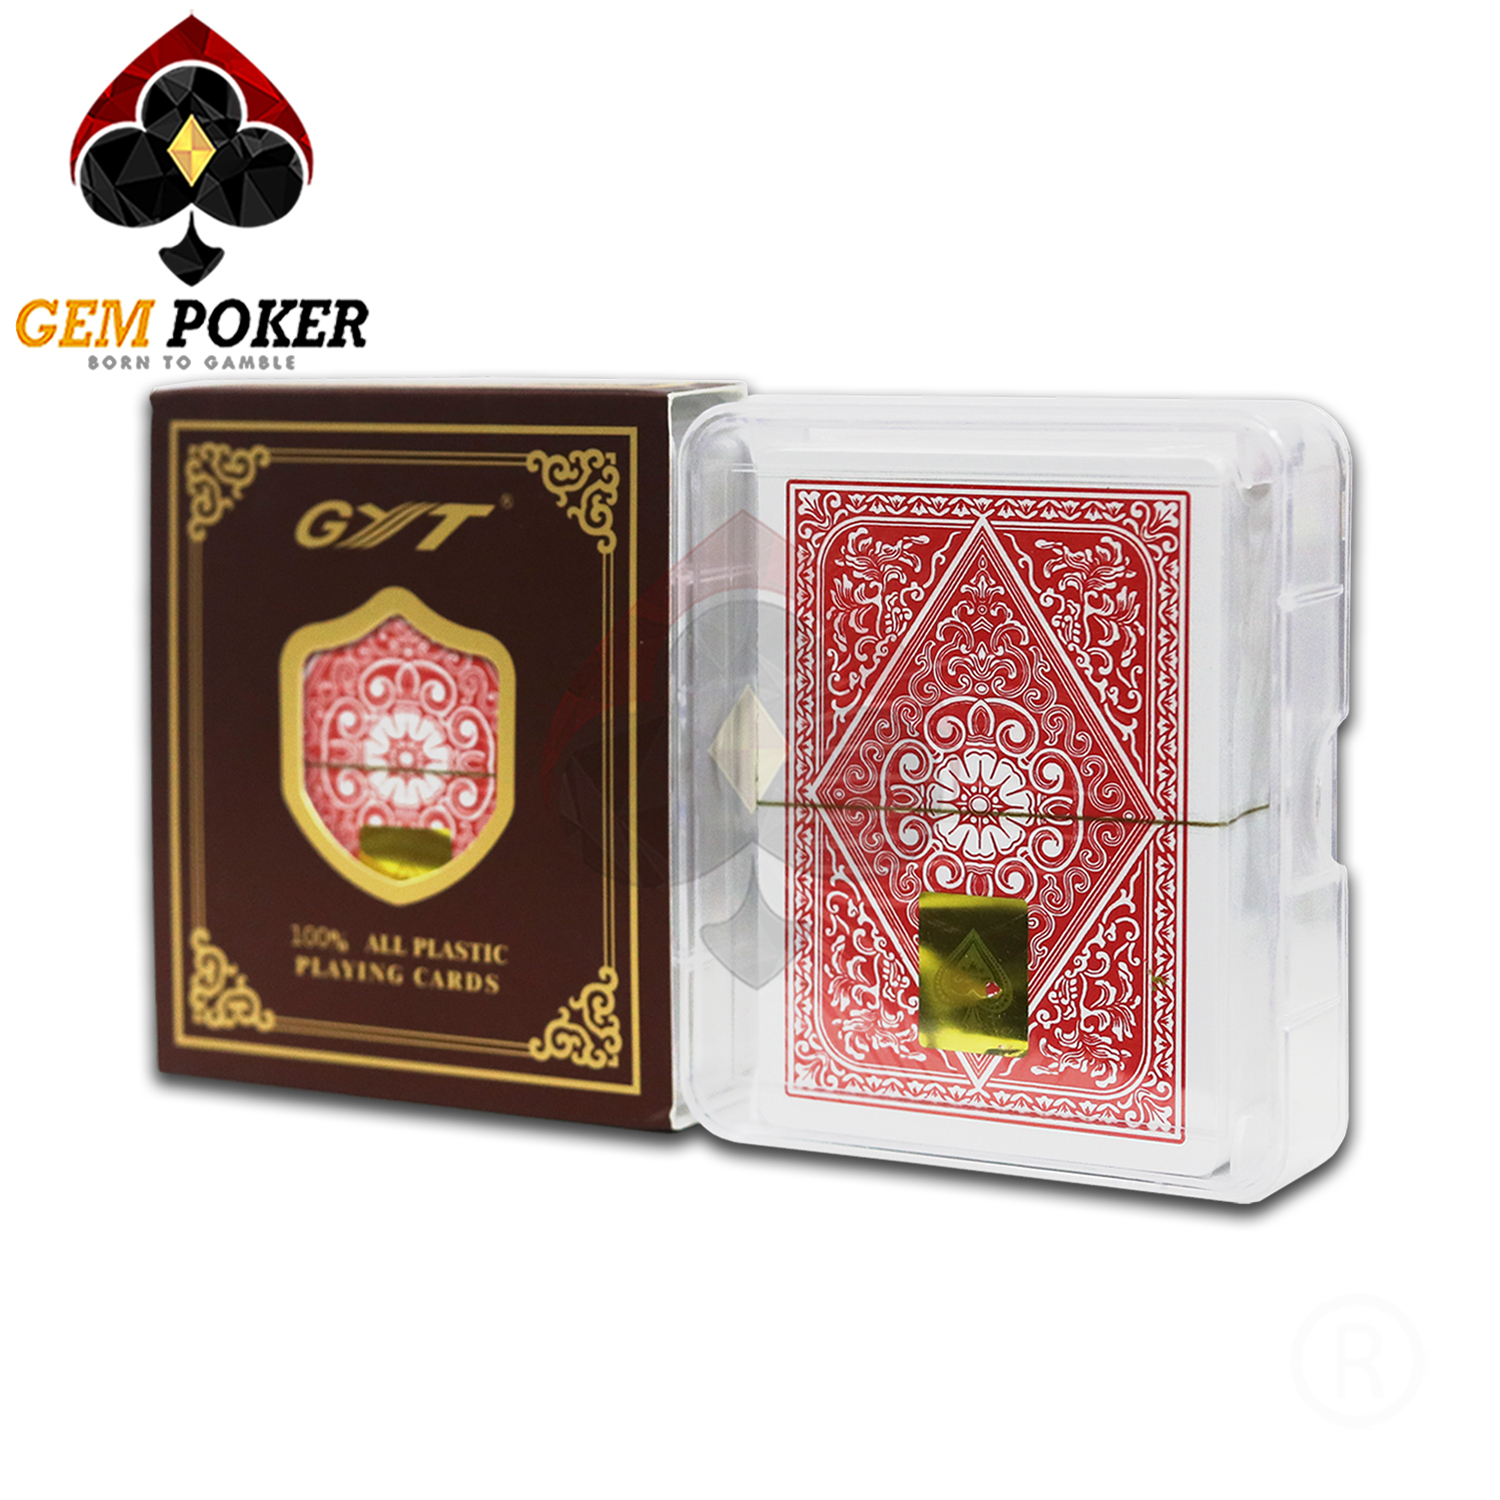 GYT POKER PLAYING CARDS